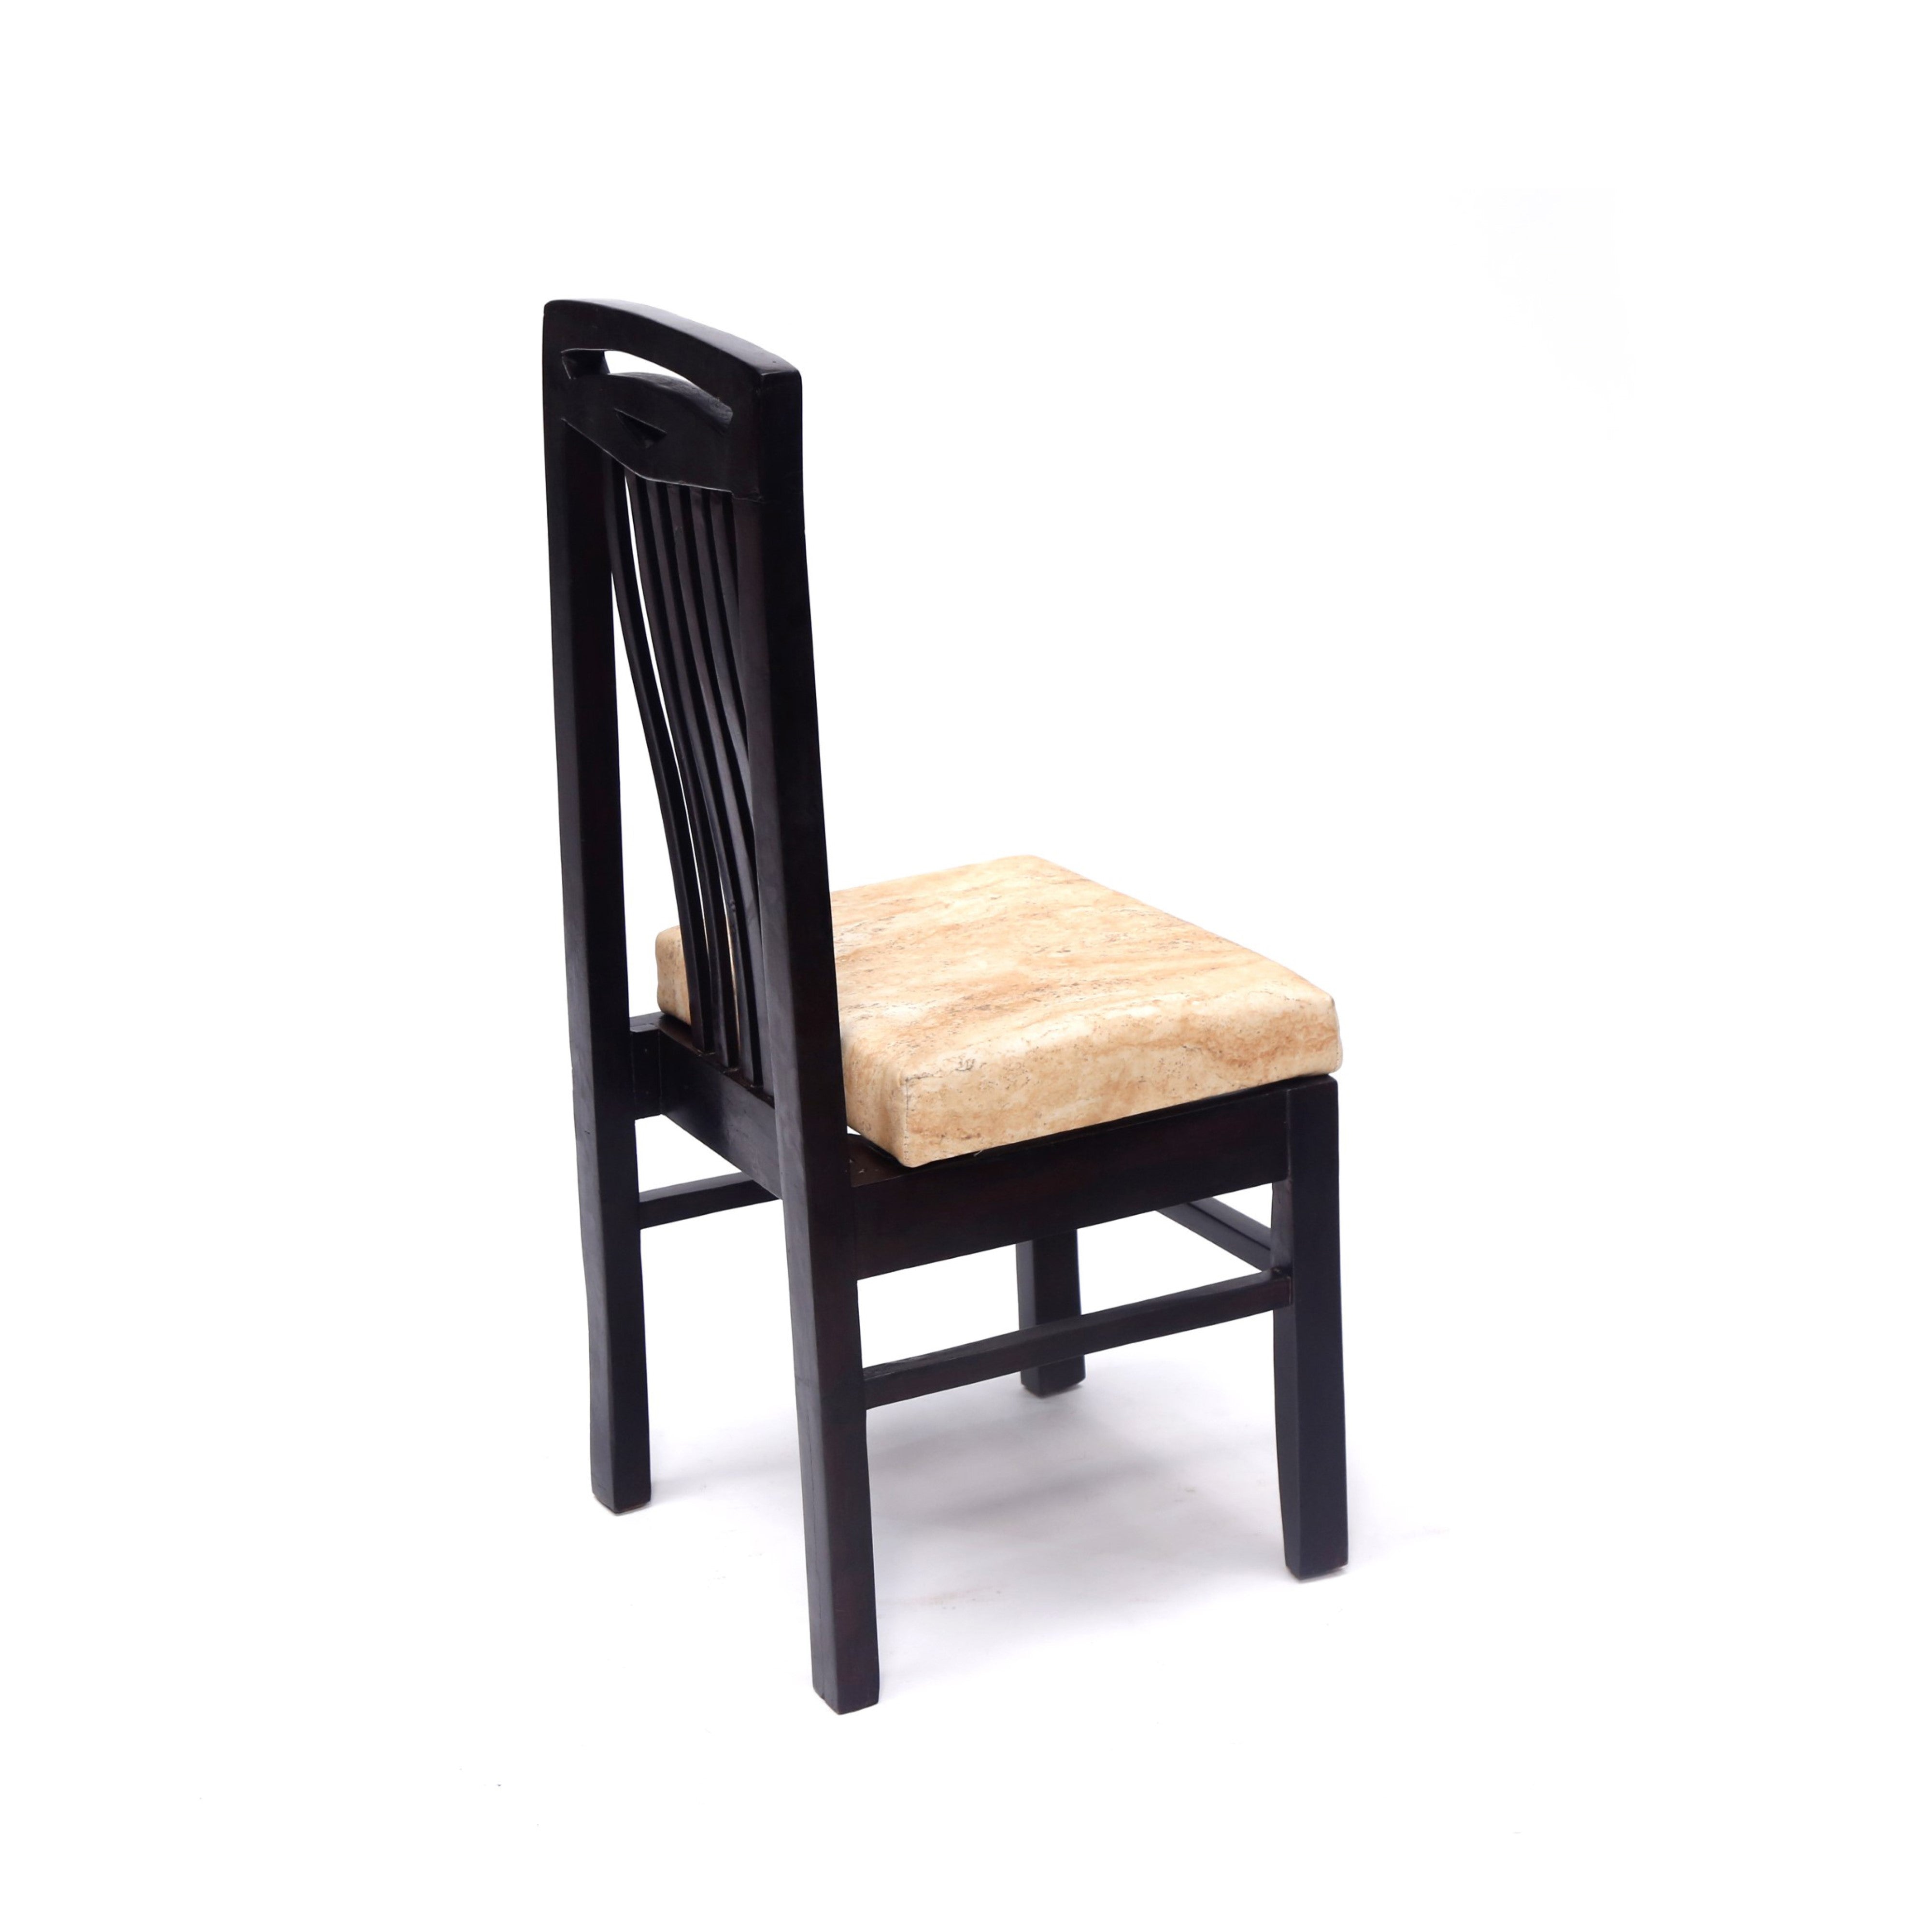 (Set of 2) Curved Striped Black Touch Chair Dining Chair